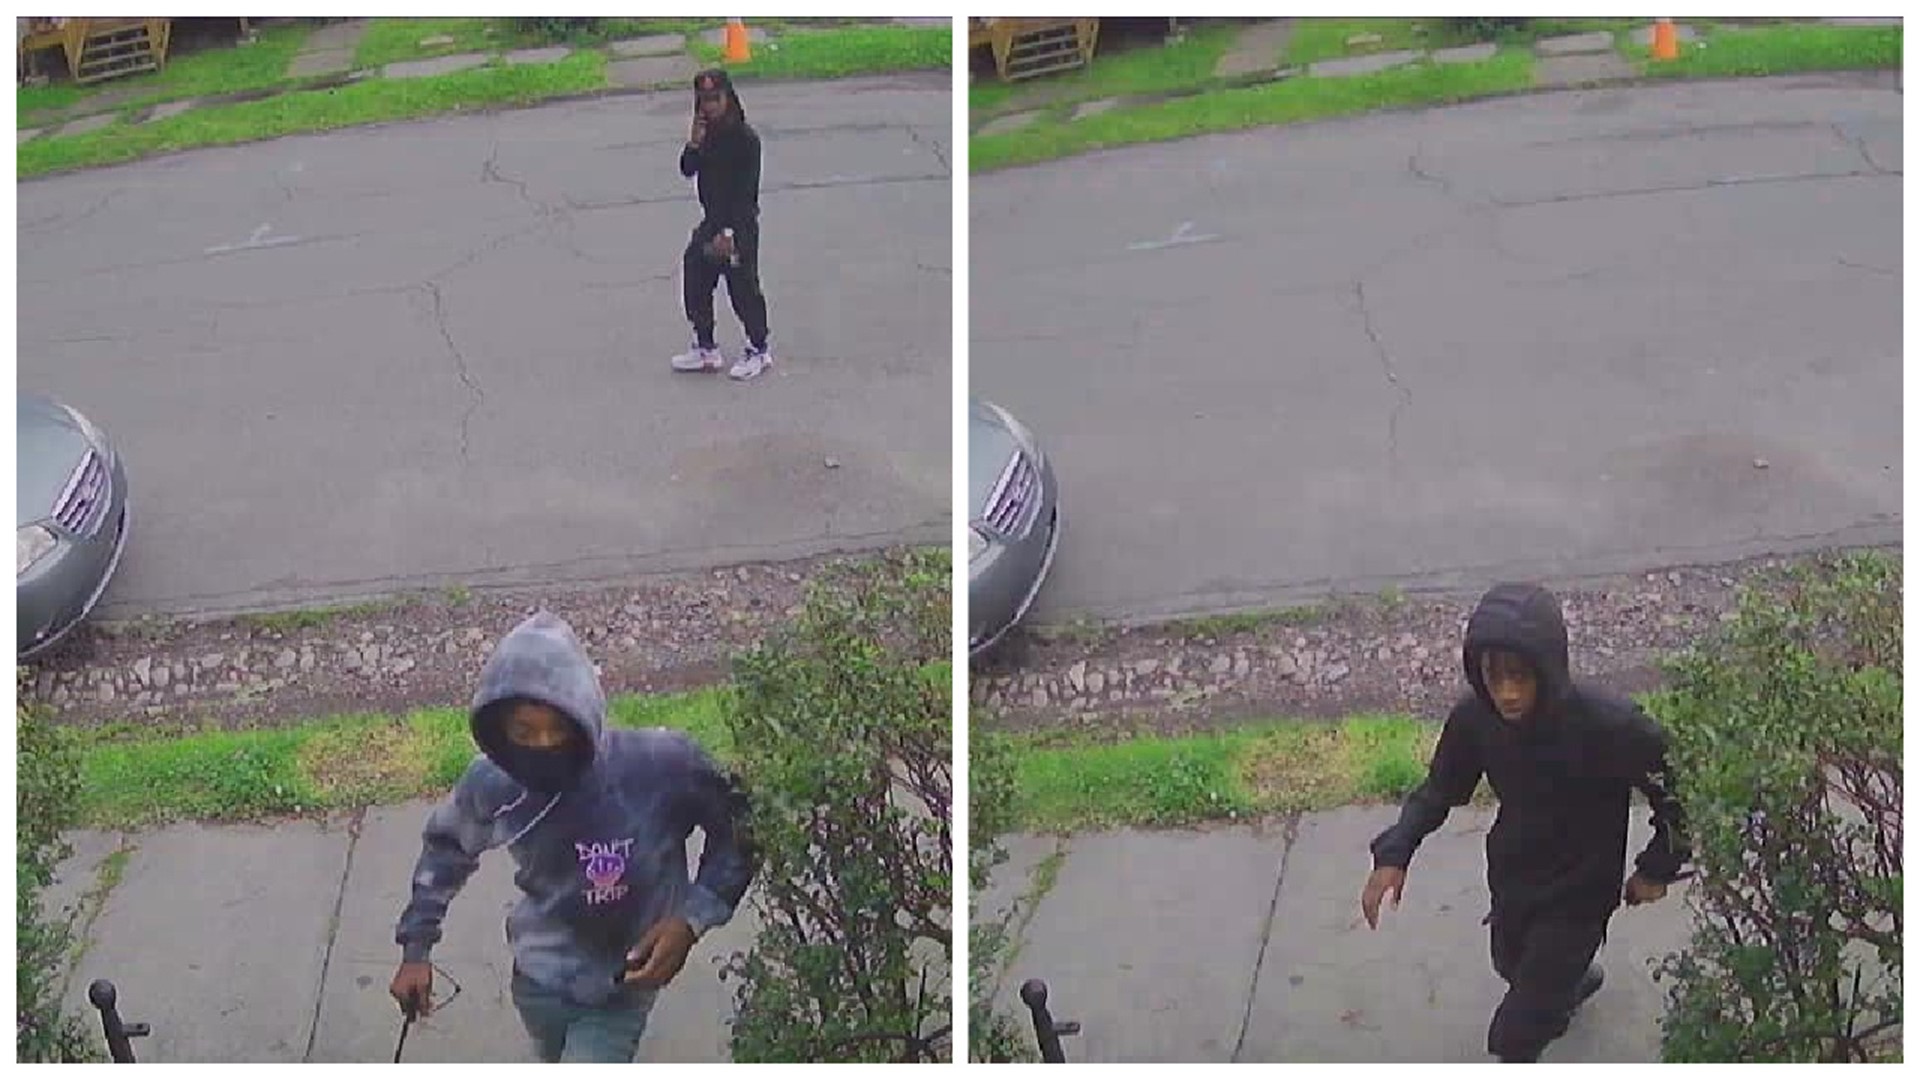 Security camera images show two people wanted for questioning.